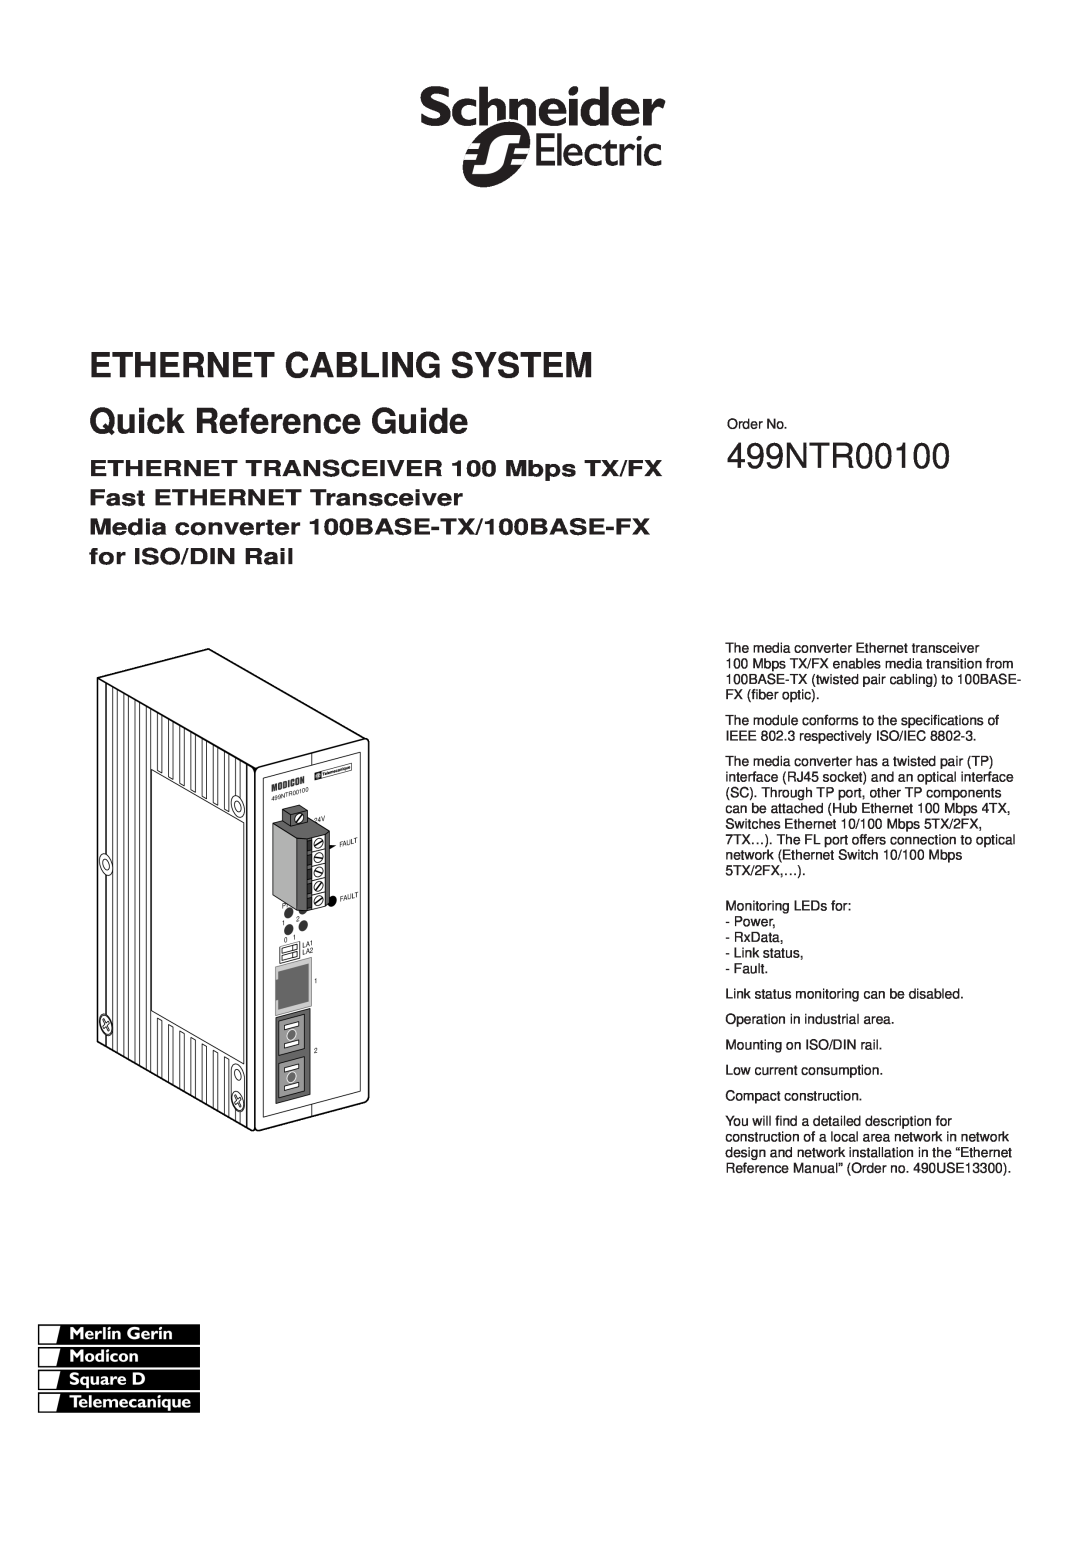 Schneider Electric 100BASE-FX, 100BASE-TX specifications ETHERNET CABLING SYSTEM Quick Reference Guide, 499NTR00100 